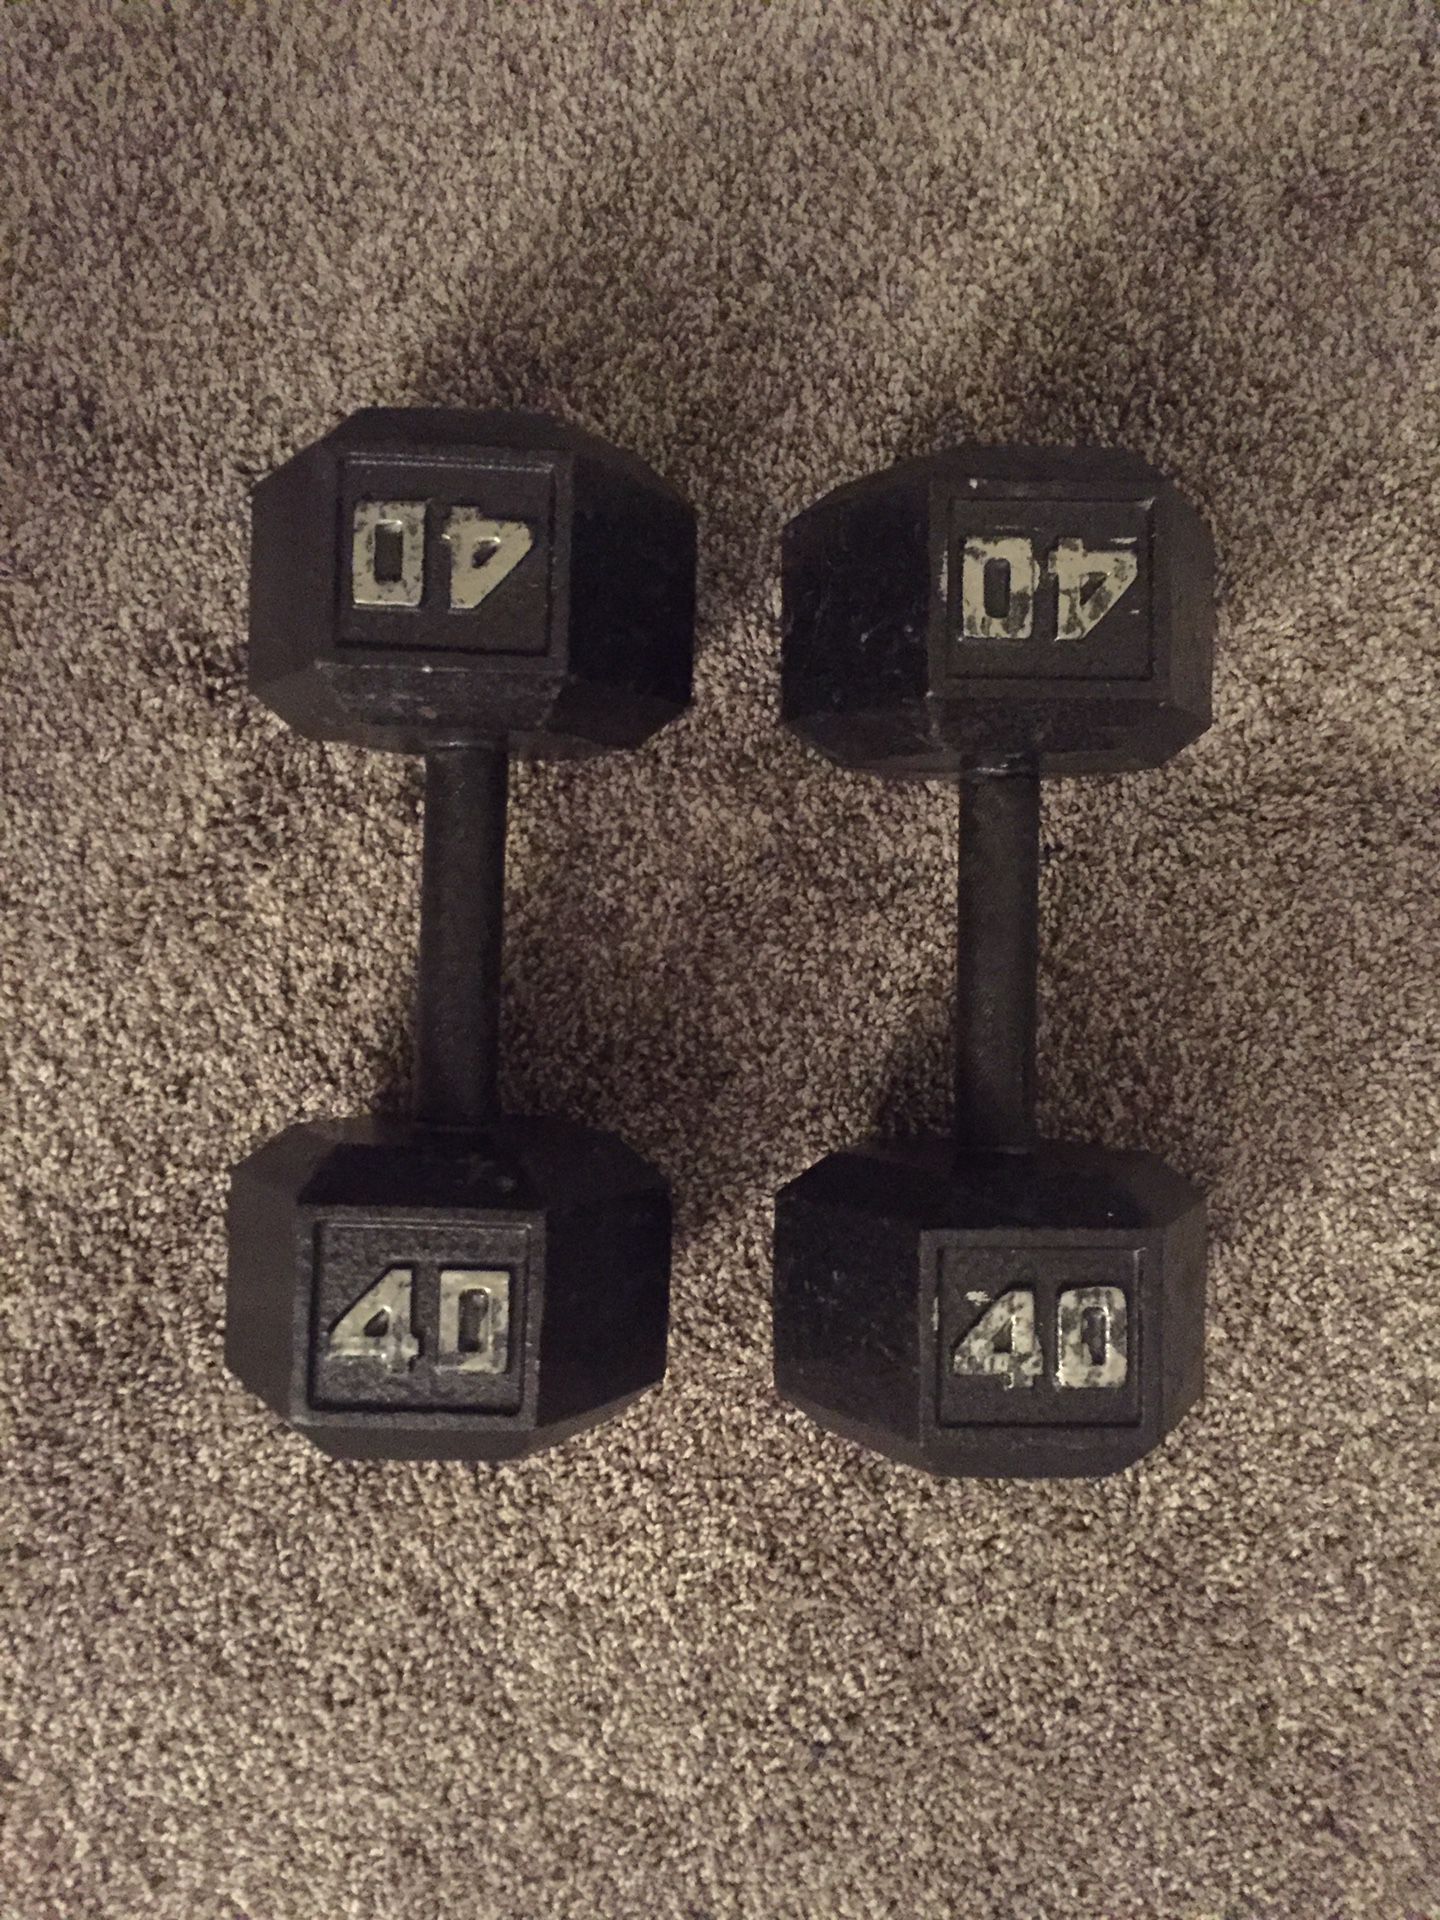 Dumbbells set of 40s and 20s